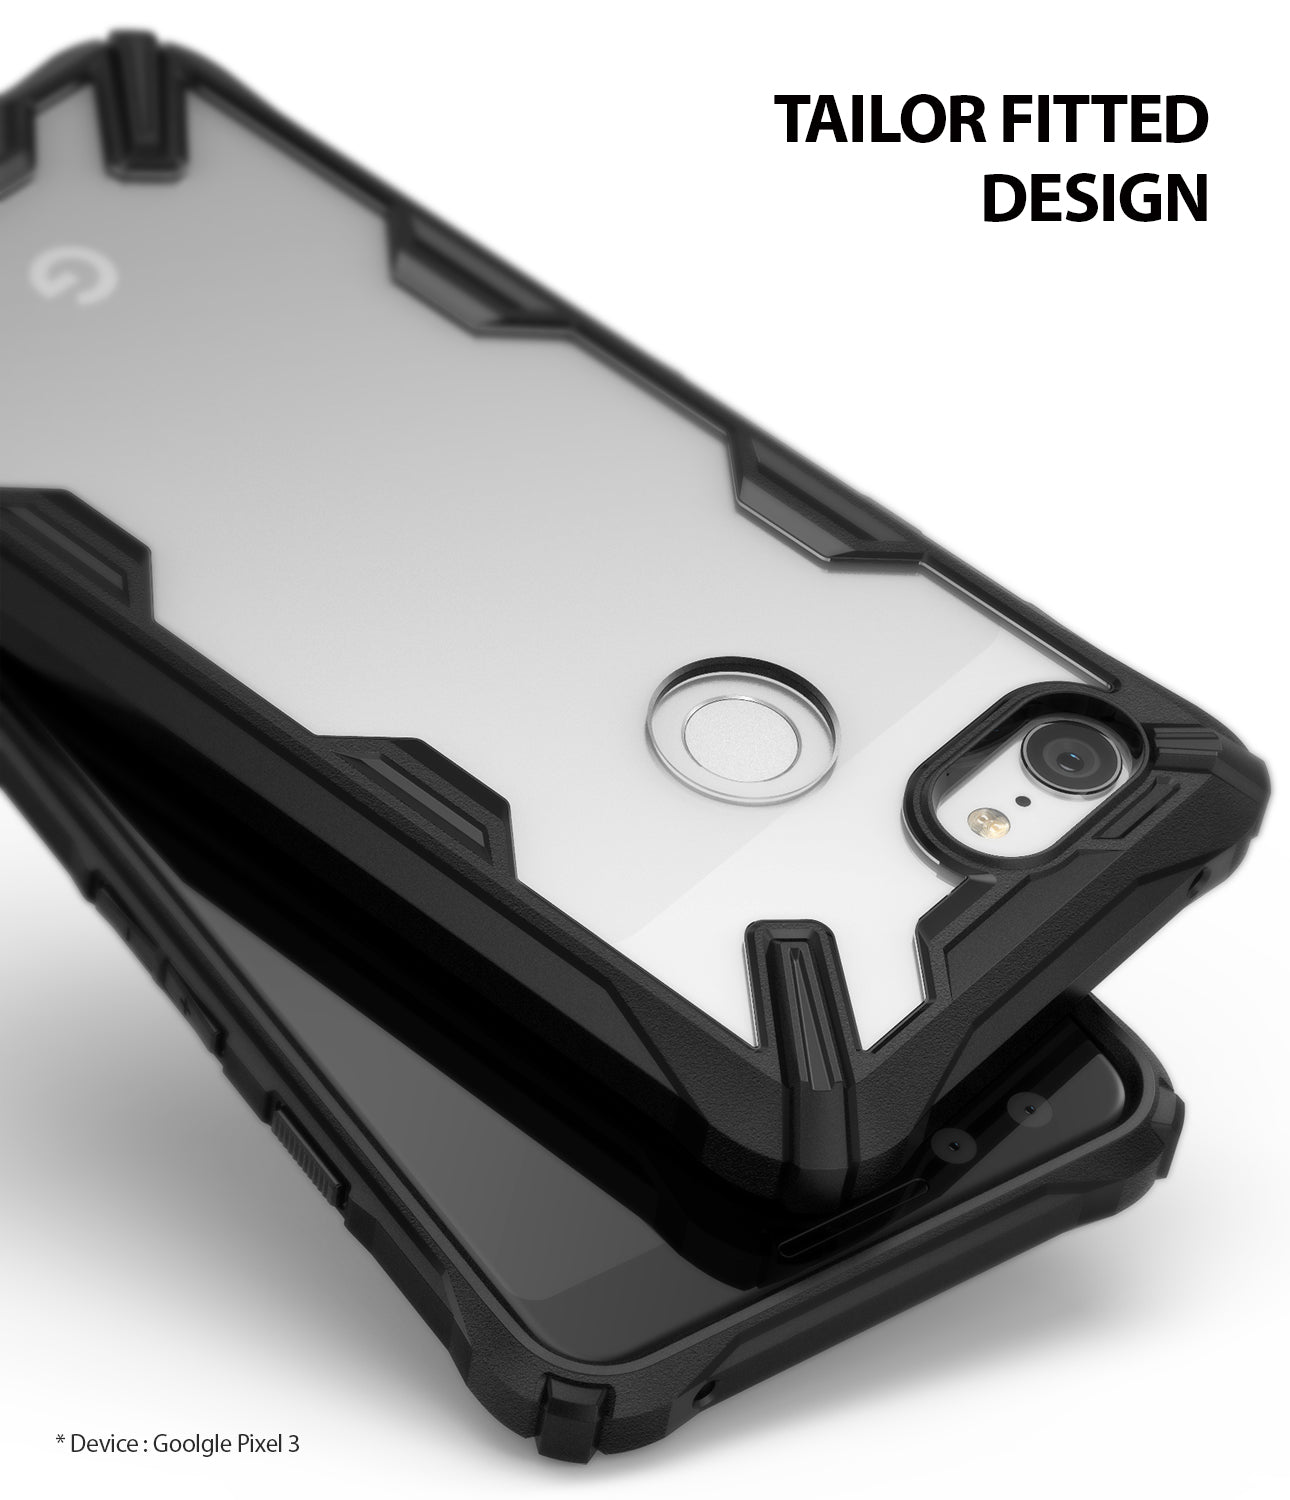 ringke fusion-x rugged heavy duty clear back case cover for google pixel 3 main case friendly